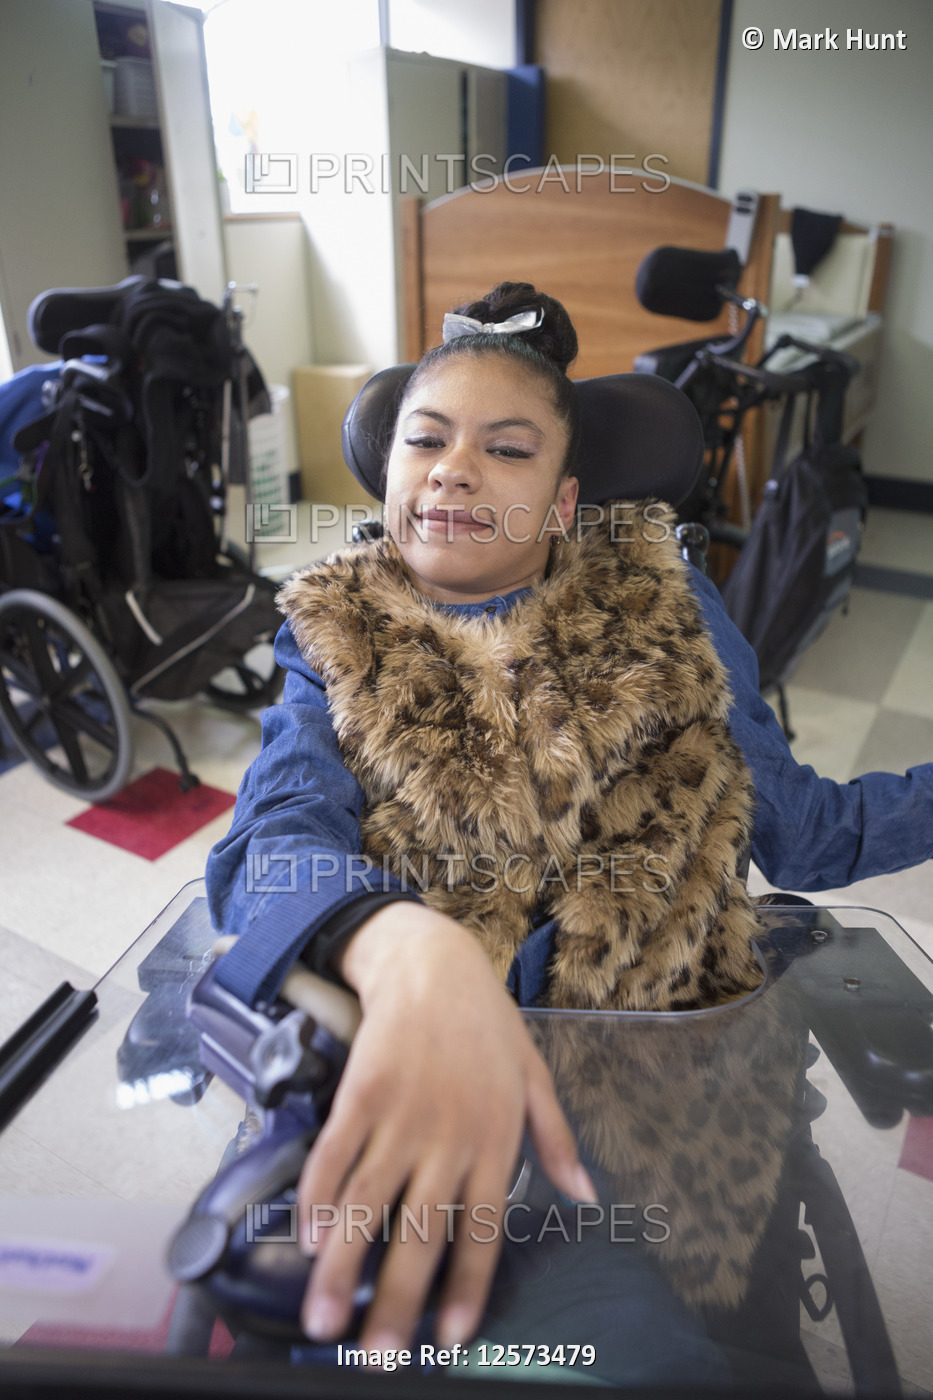 Teen with Spastic Dystonic Cerebral Palsy at school